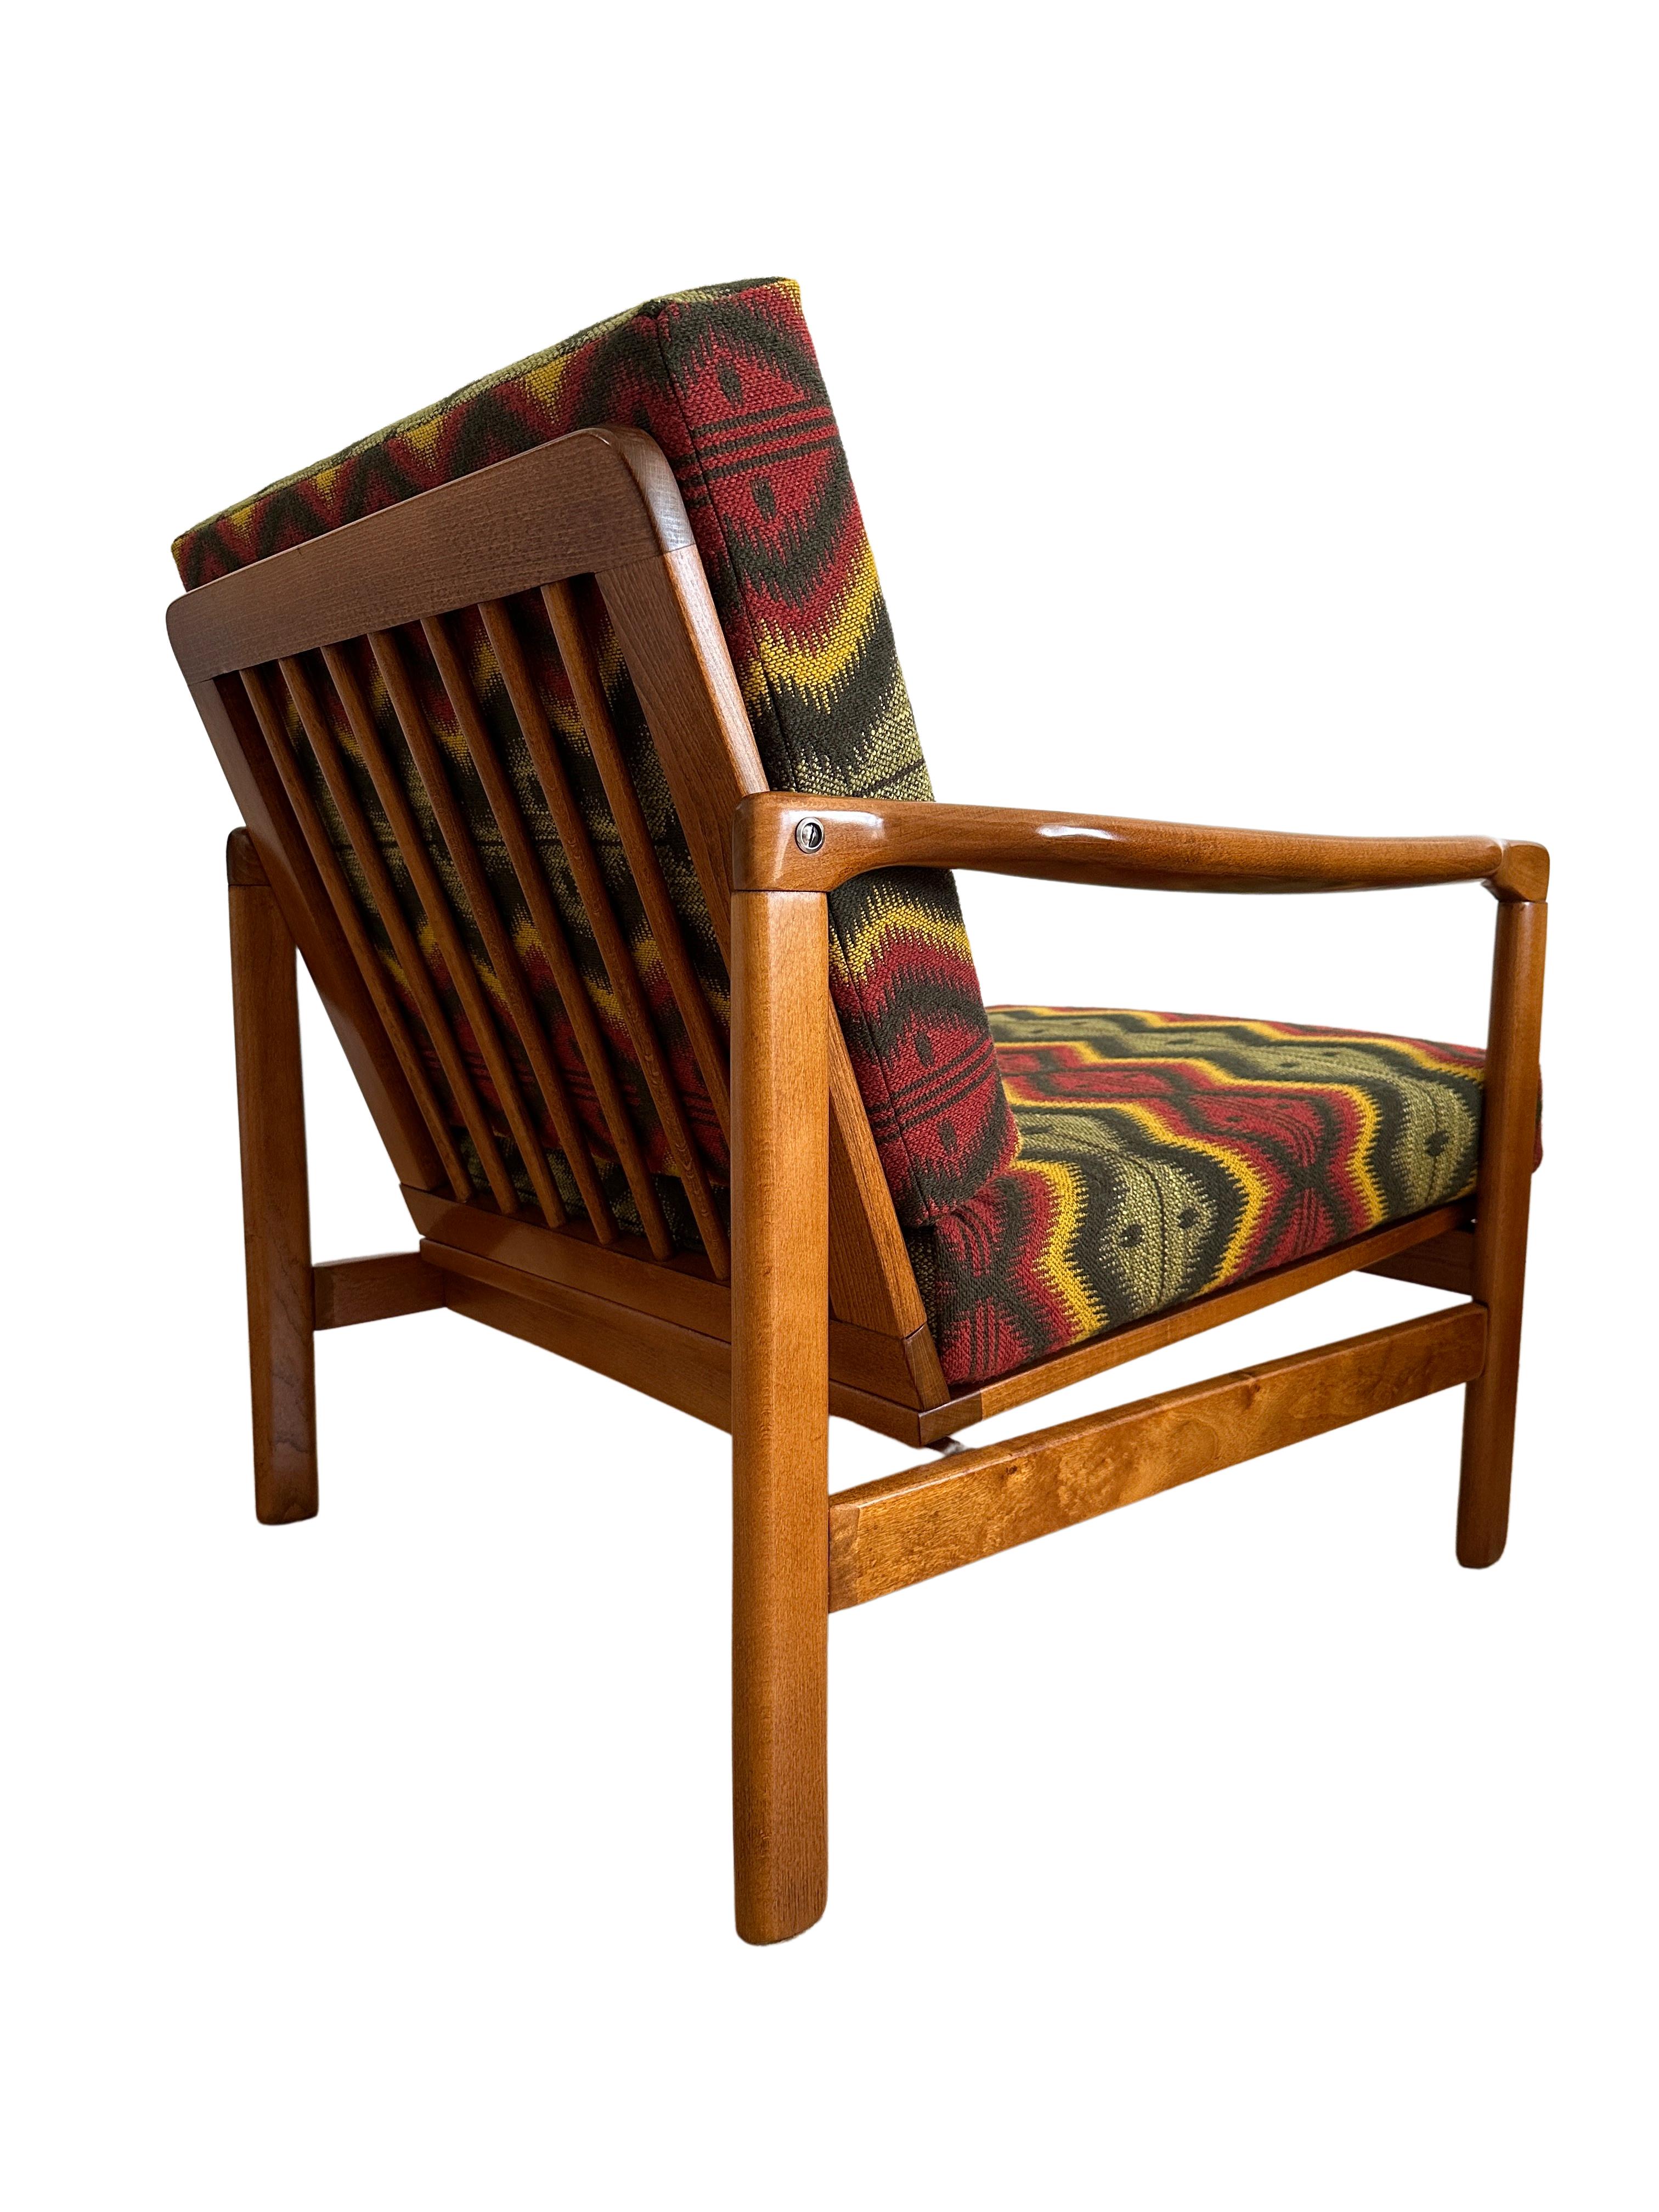 Set of Two Armchairs by Zenon Bączyk, Mind the Gap Upholstery, Europe, 1960s For Sale 3